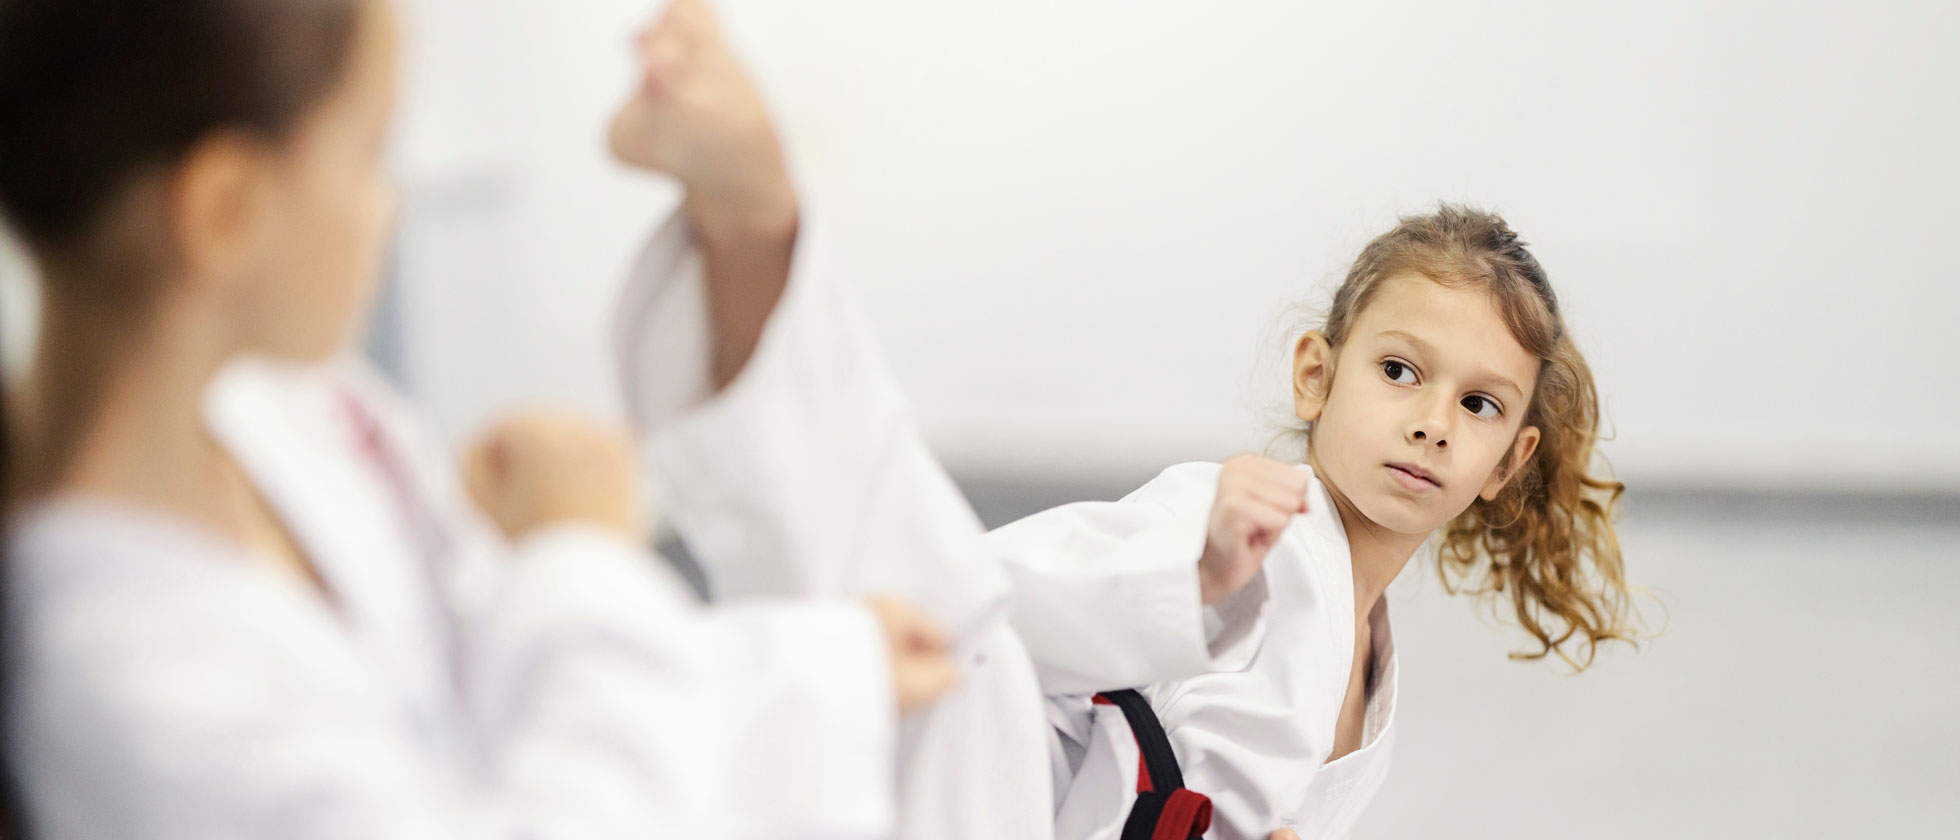 Top-Rated Karate In Bulverde, TX for Kids Ages 8-11